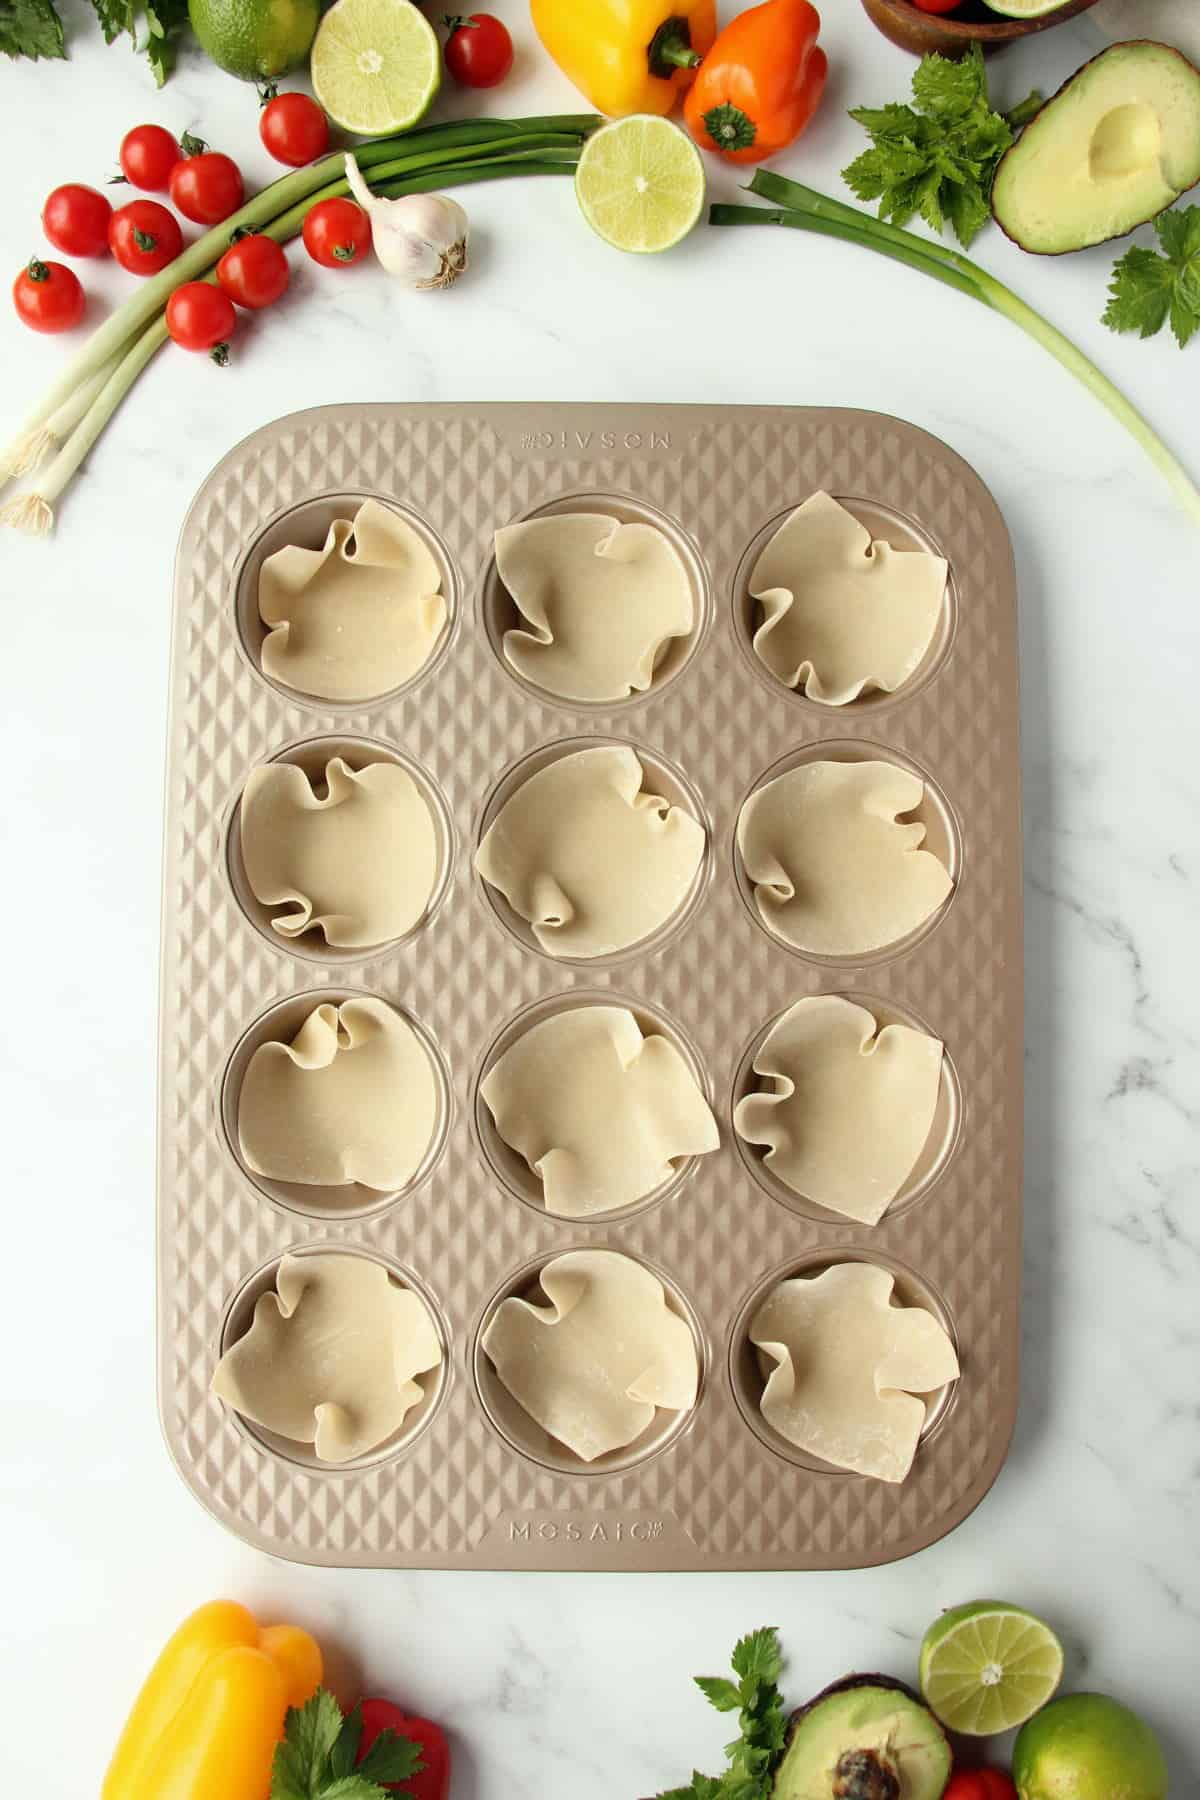 placing wonton wrappers inside the muffin pan